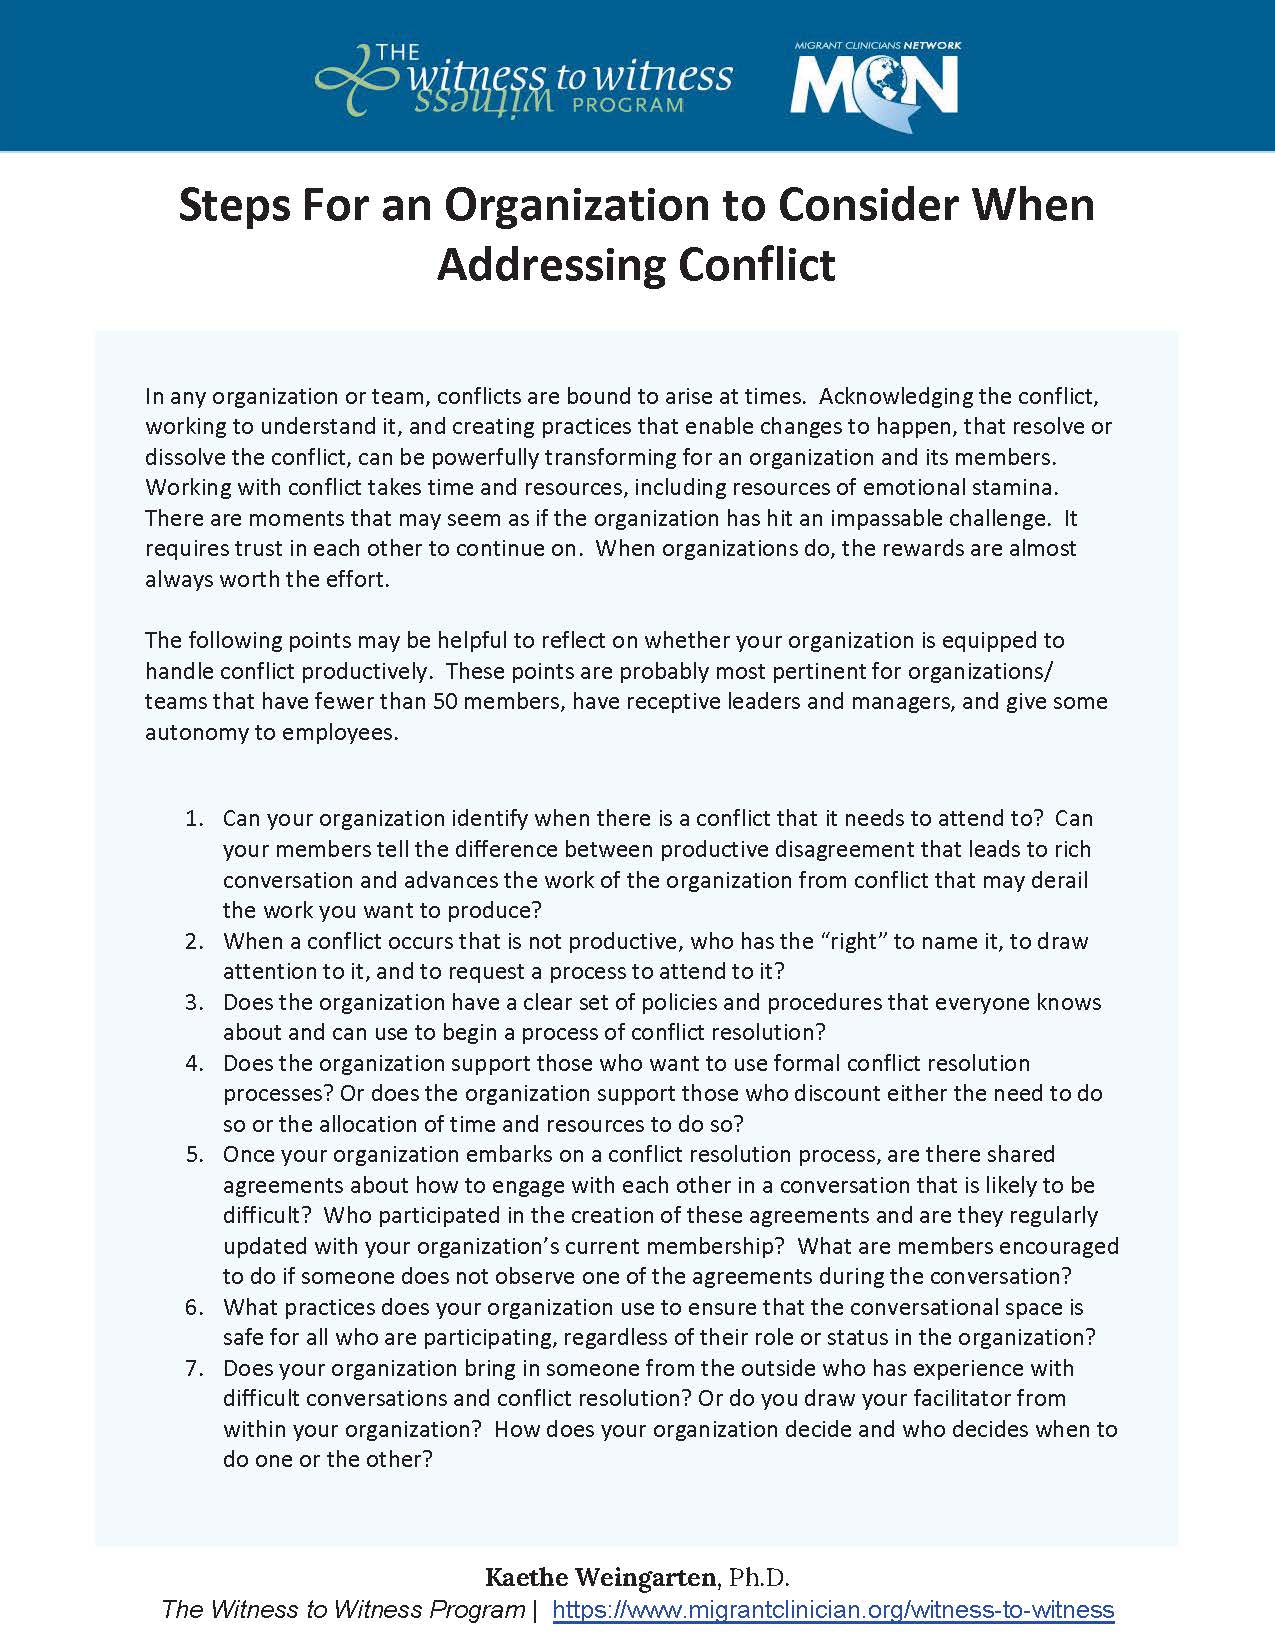 Steps For an Organization to Consider When Addressing Conflict